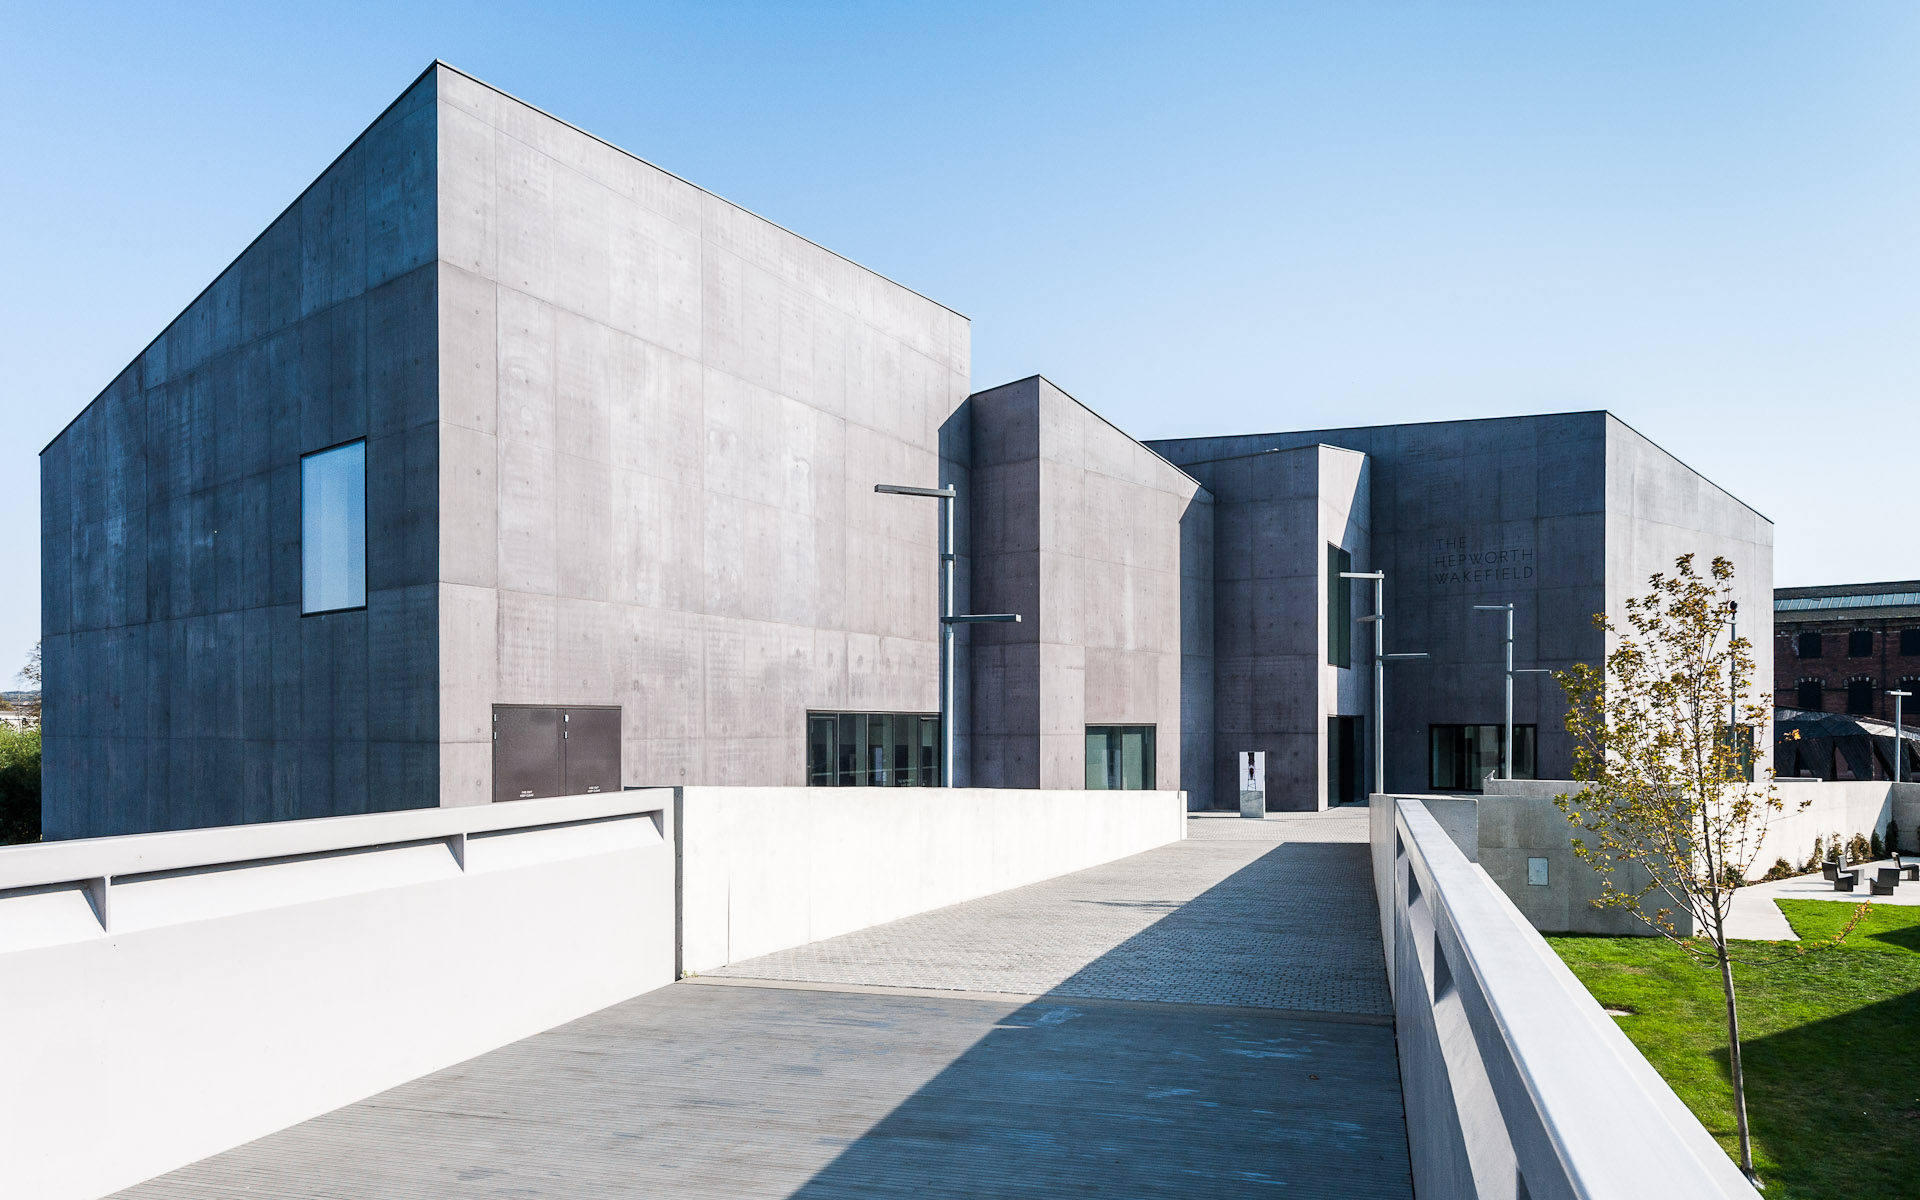 Exterior daytime photograph of Hepworth Wakefield gallery in West Yorkshire England